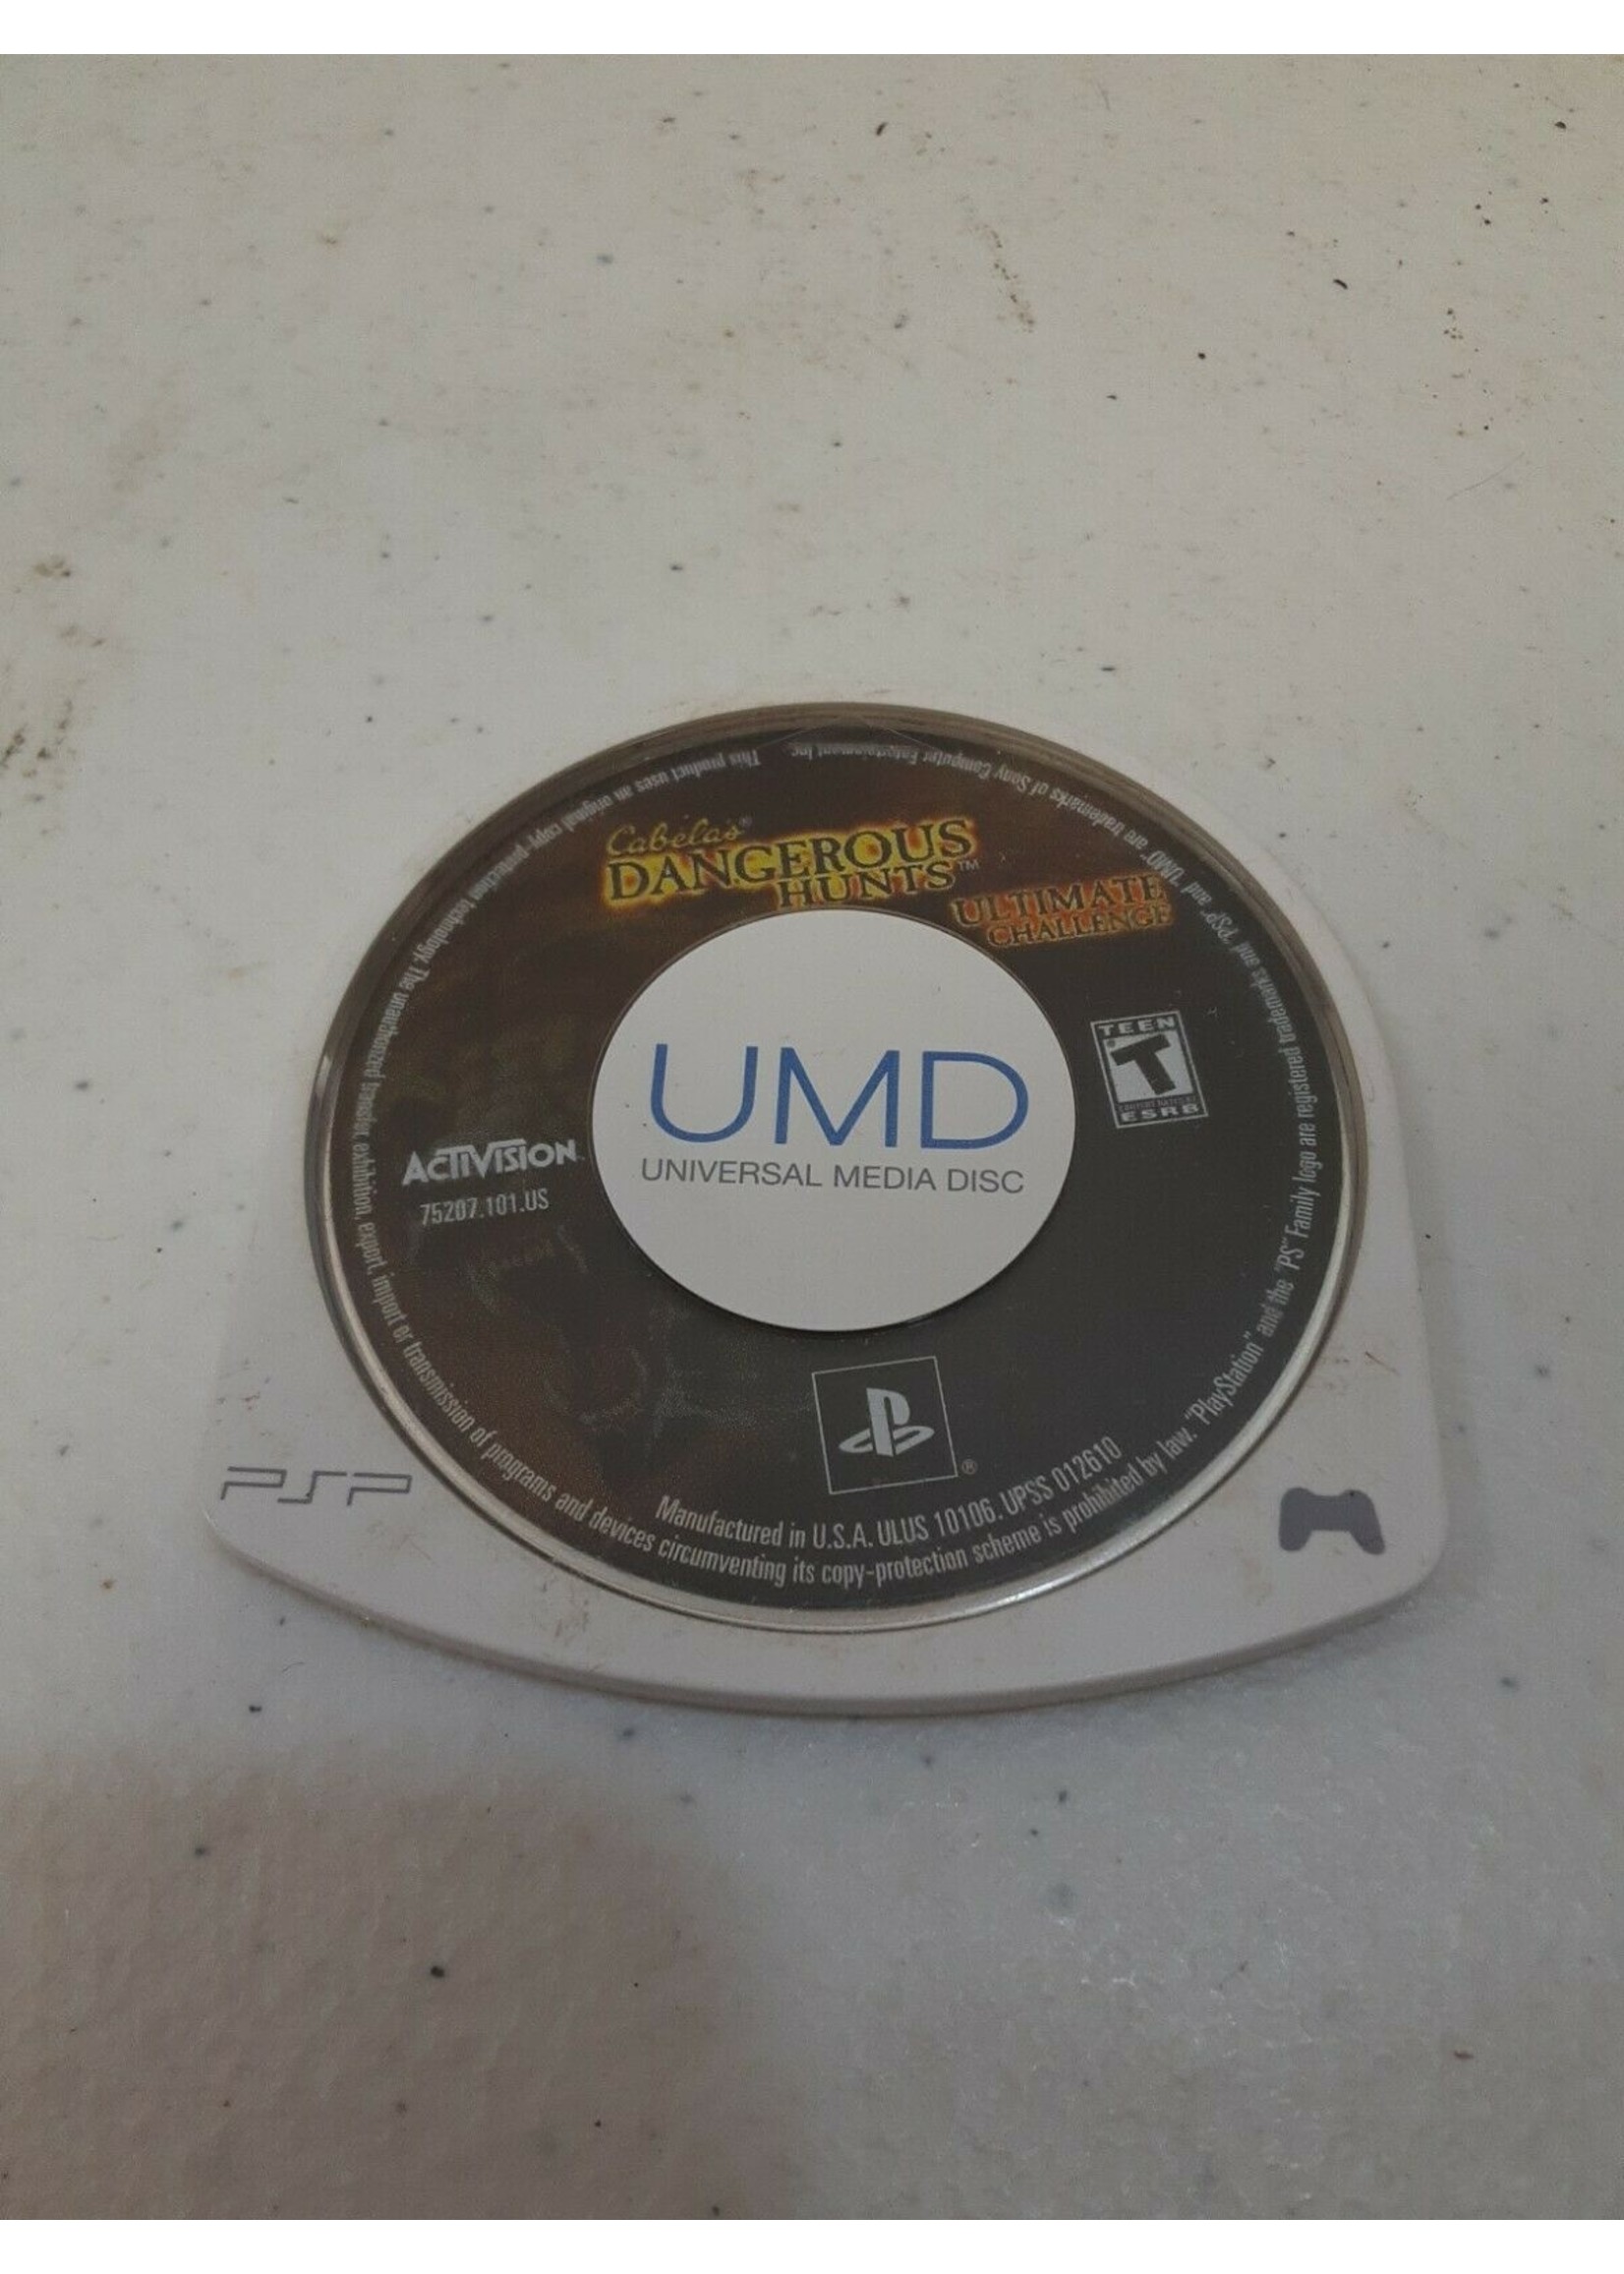 Sony Playstation Portable (PSP) Cabela's Dangerous Hunts Ultimate Challenge - (Game Only)